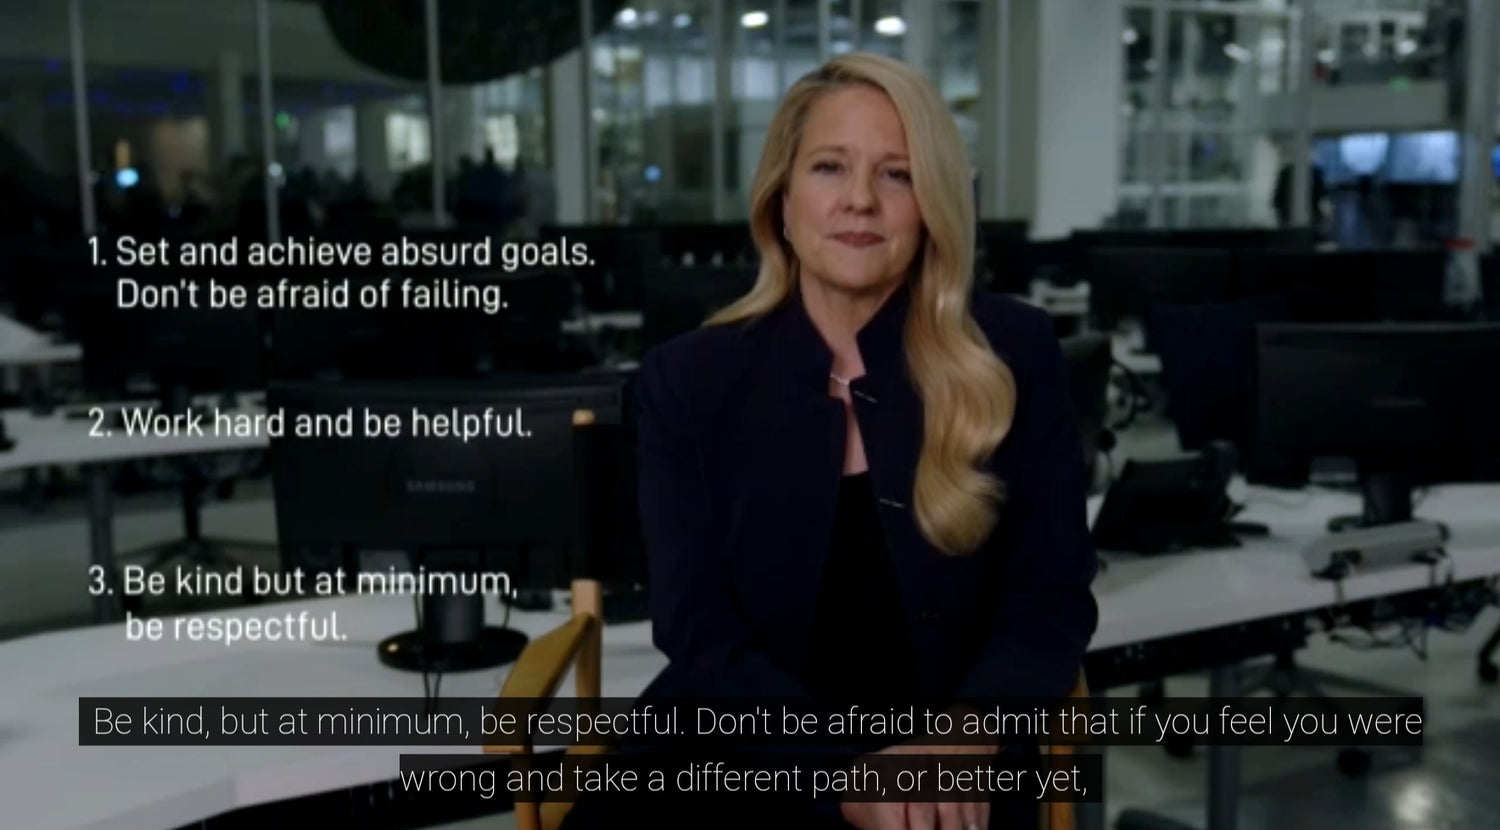 SpaceX President Gwynne Shotwell Gives Advice To Northwestern University Class of 2021 Graduates [VIDEO]